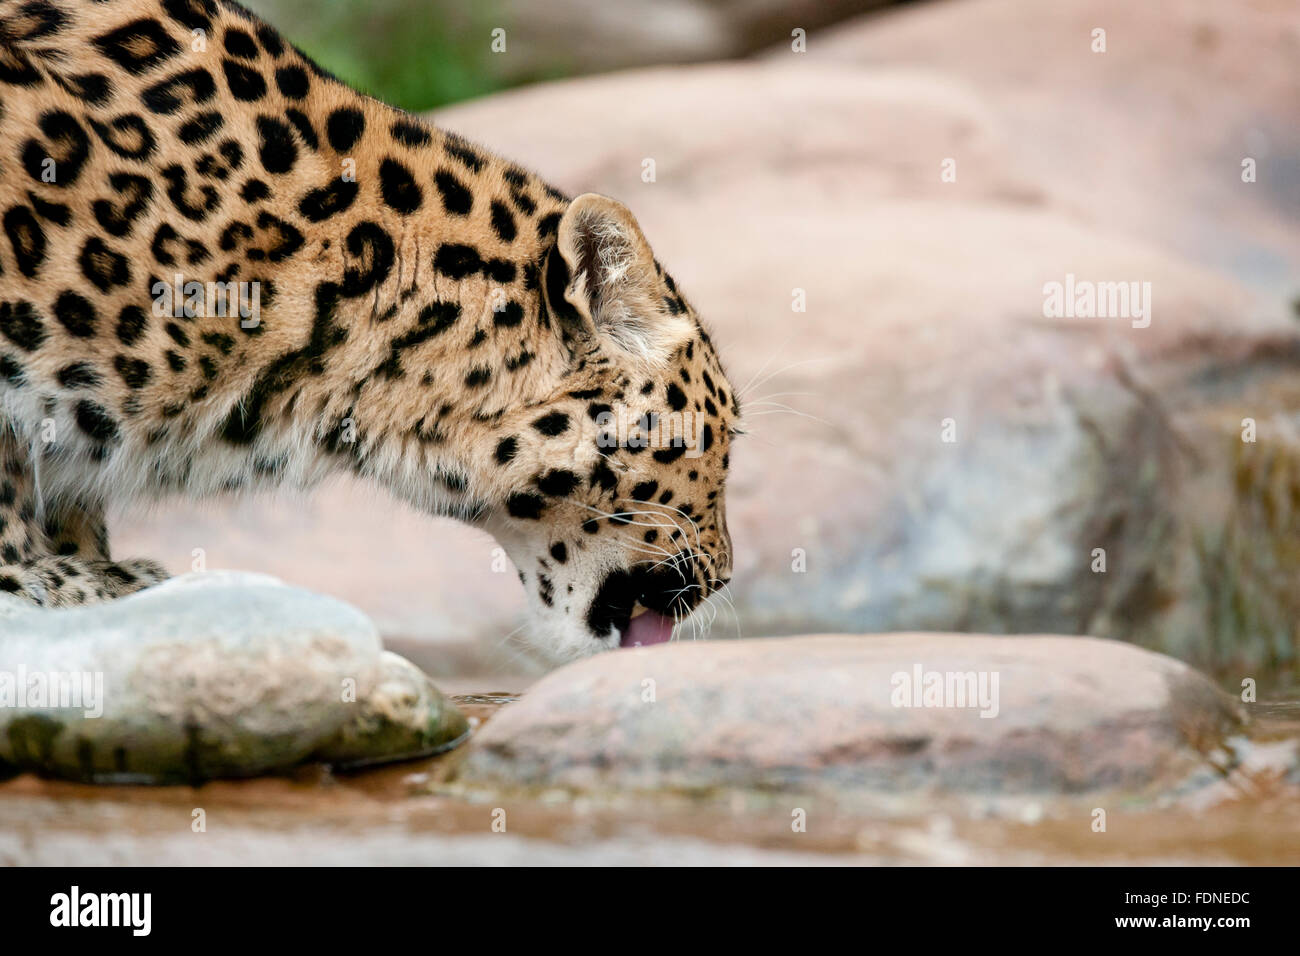 The Amur leopard is probably the most endangered big cat in the world, with as few as 45 adults left in the Wild Stock Photo